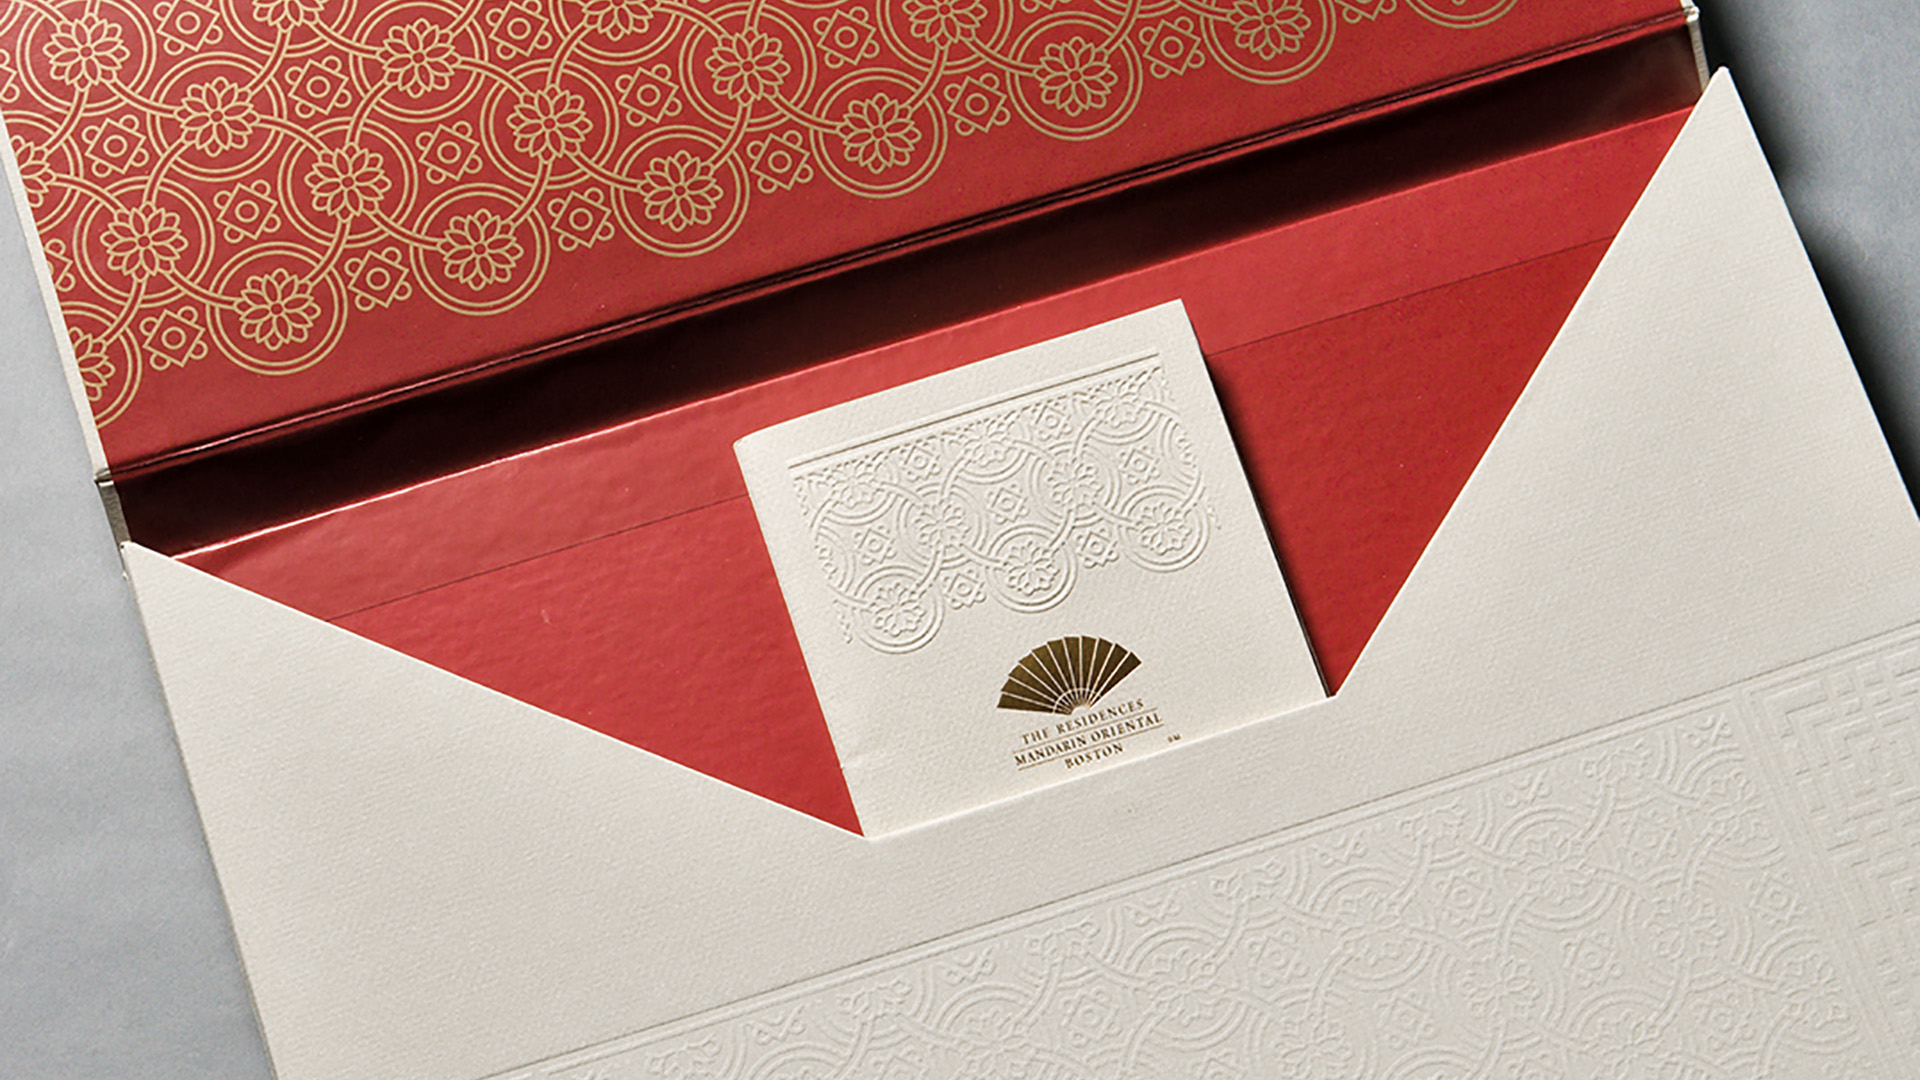 mandarin oriental box open with red interior and brochure